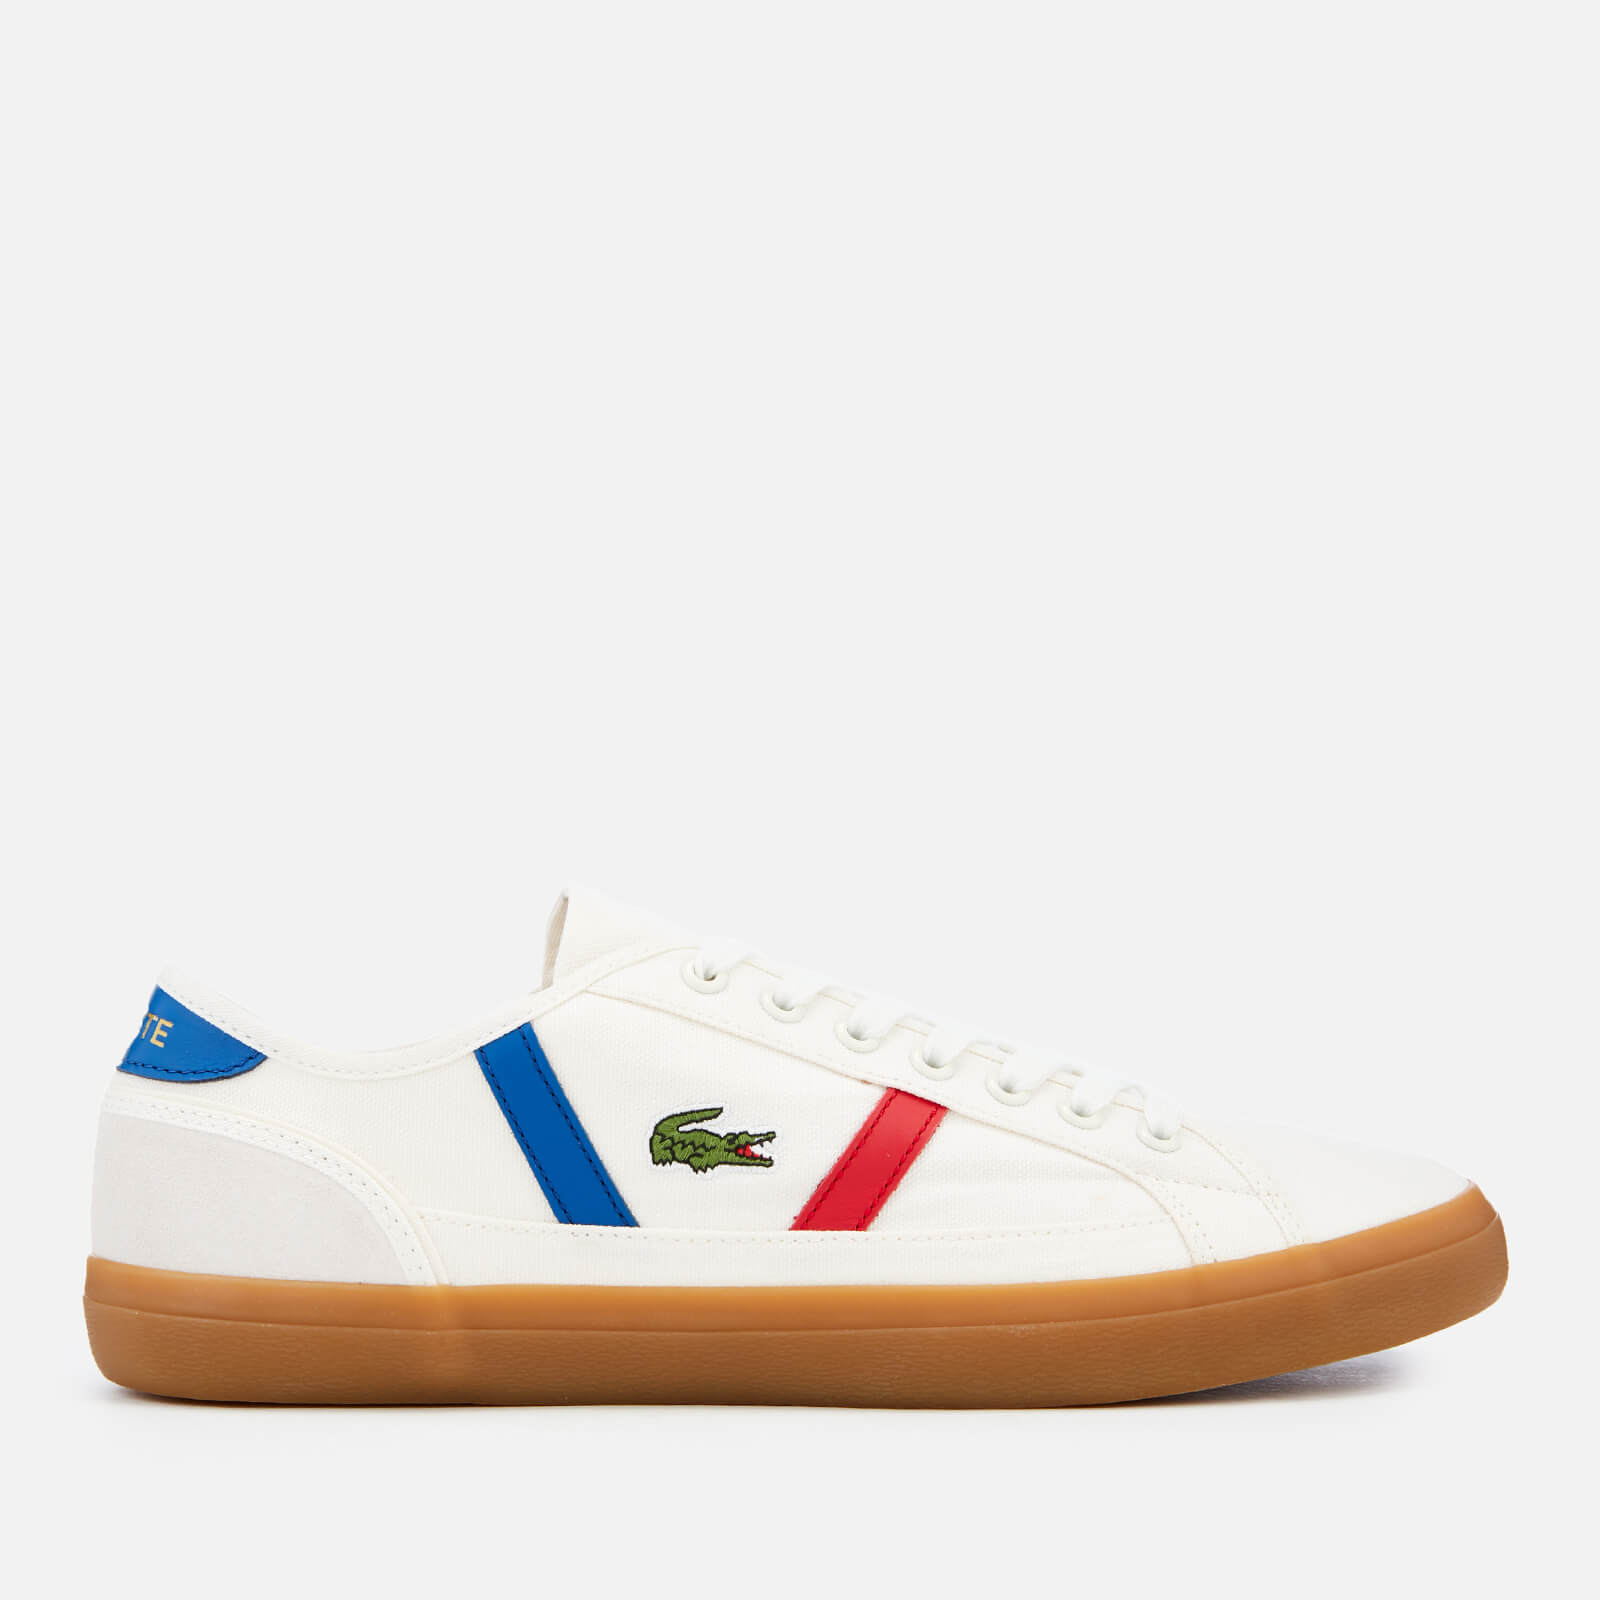 Sideline 119 2 Canvas Trainers 